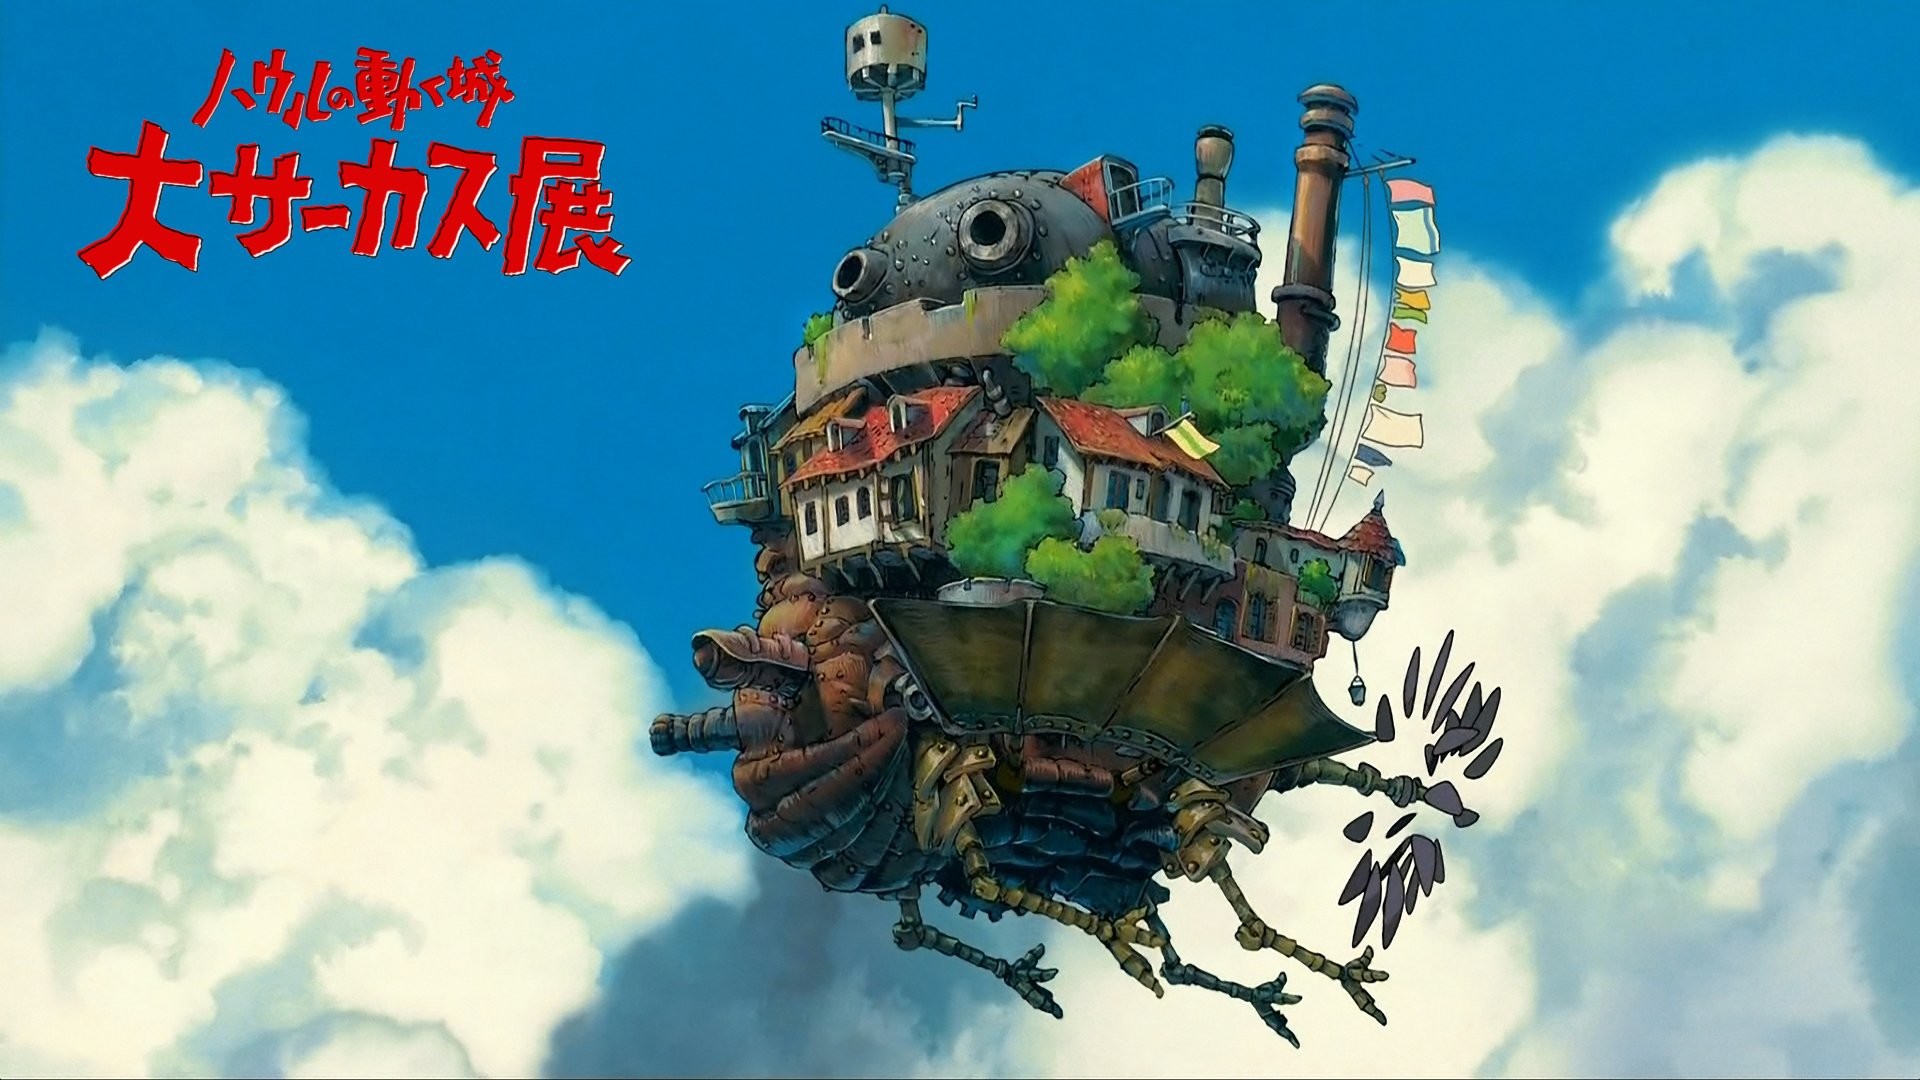 howl's moving castle wallpaper,illustration,animation,world,vehicle,fictional character